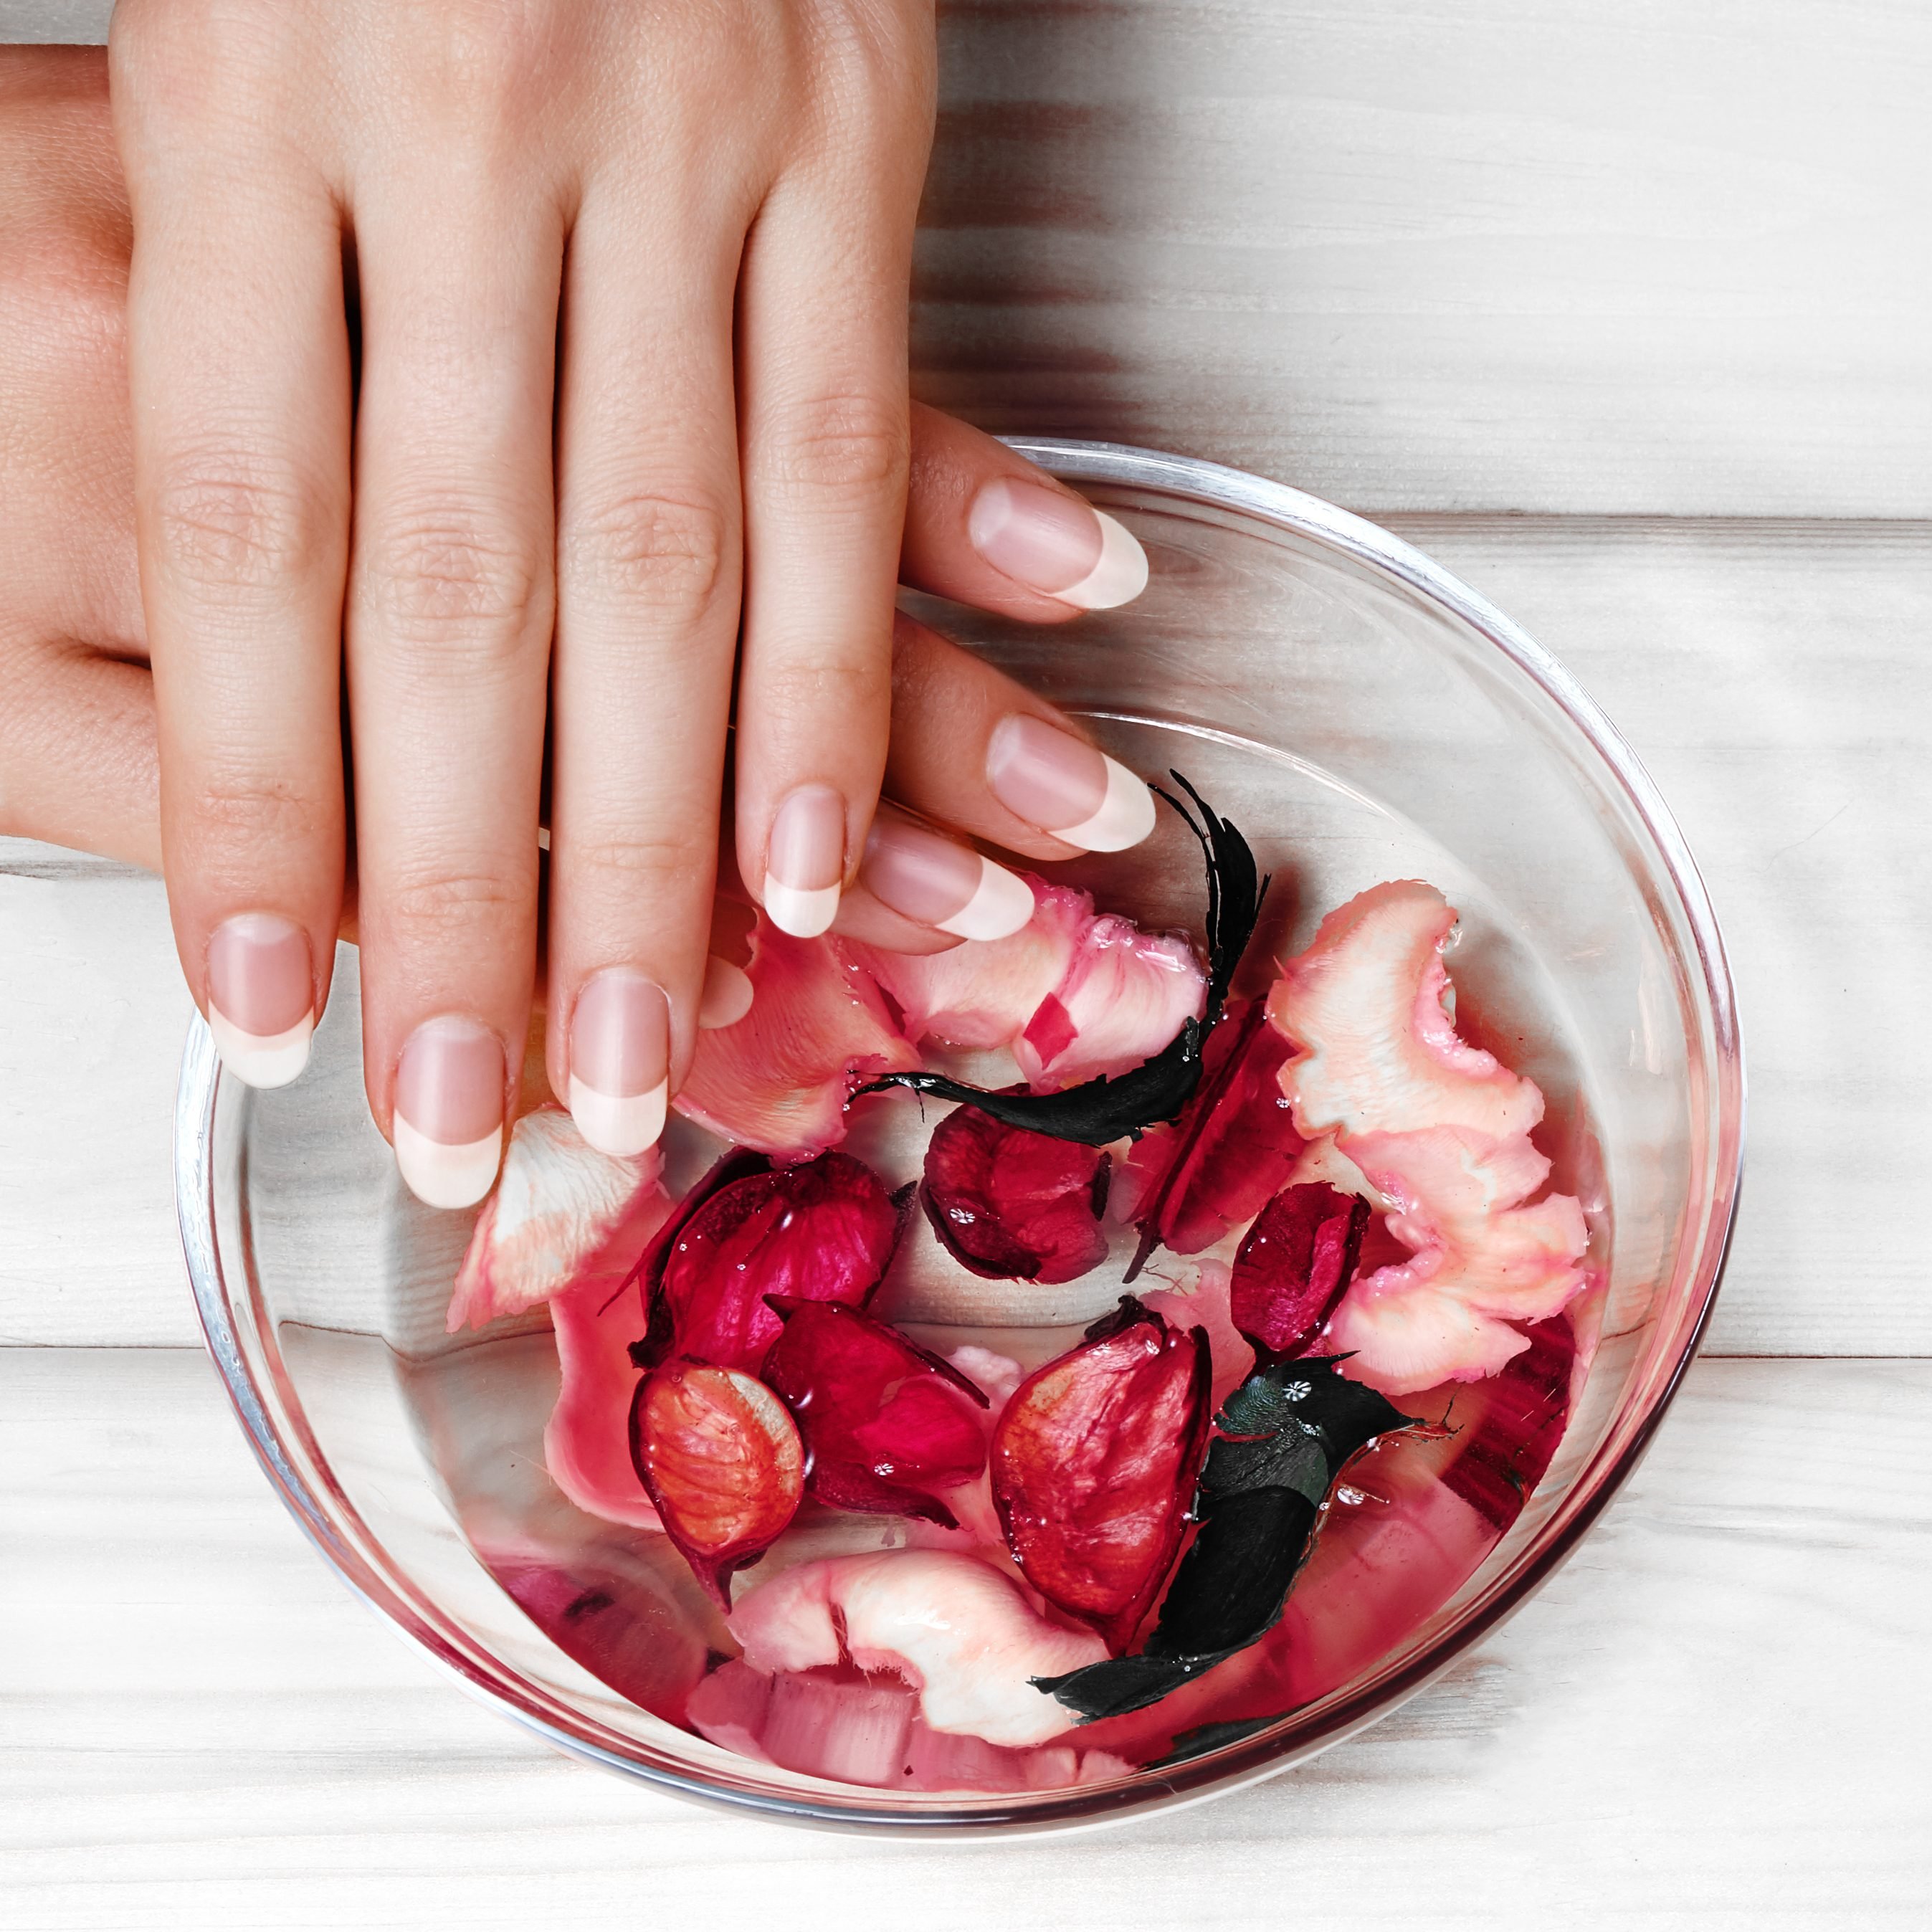 8 Surprising Household Items for Perfect Nails